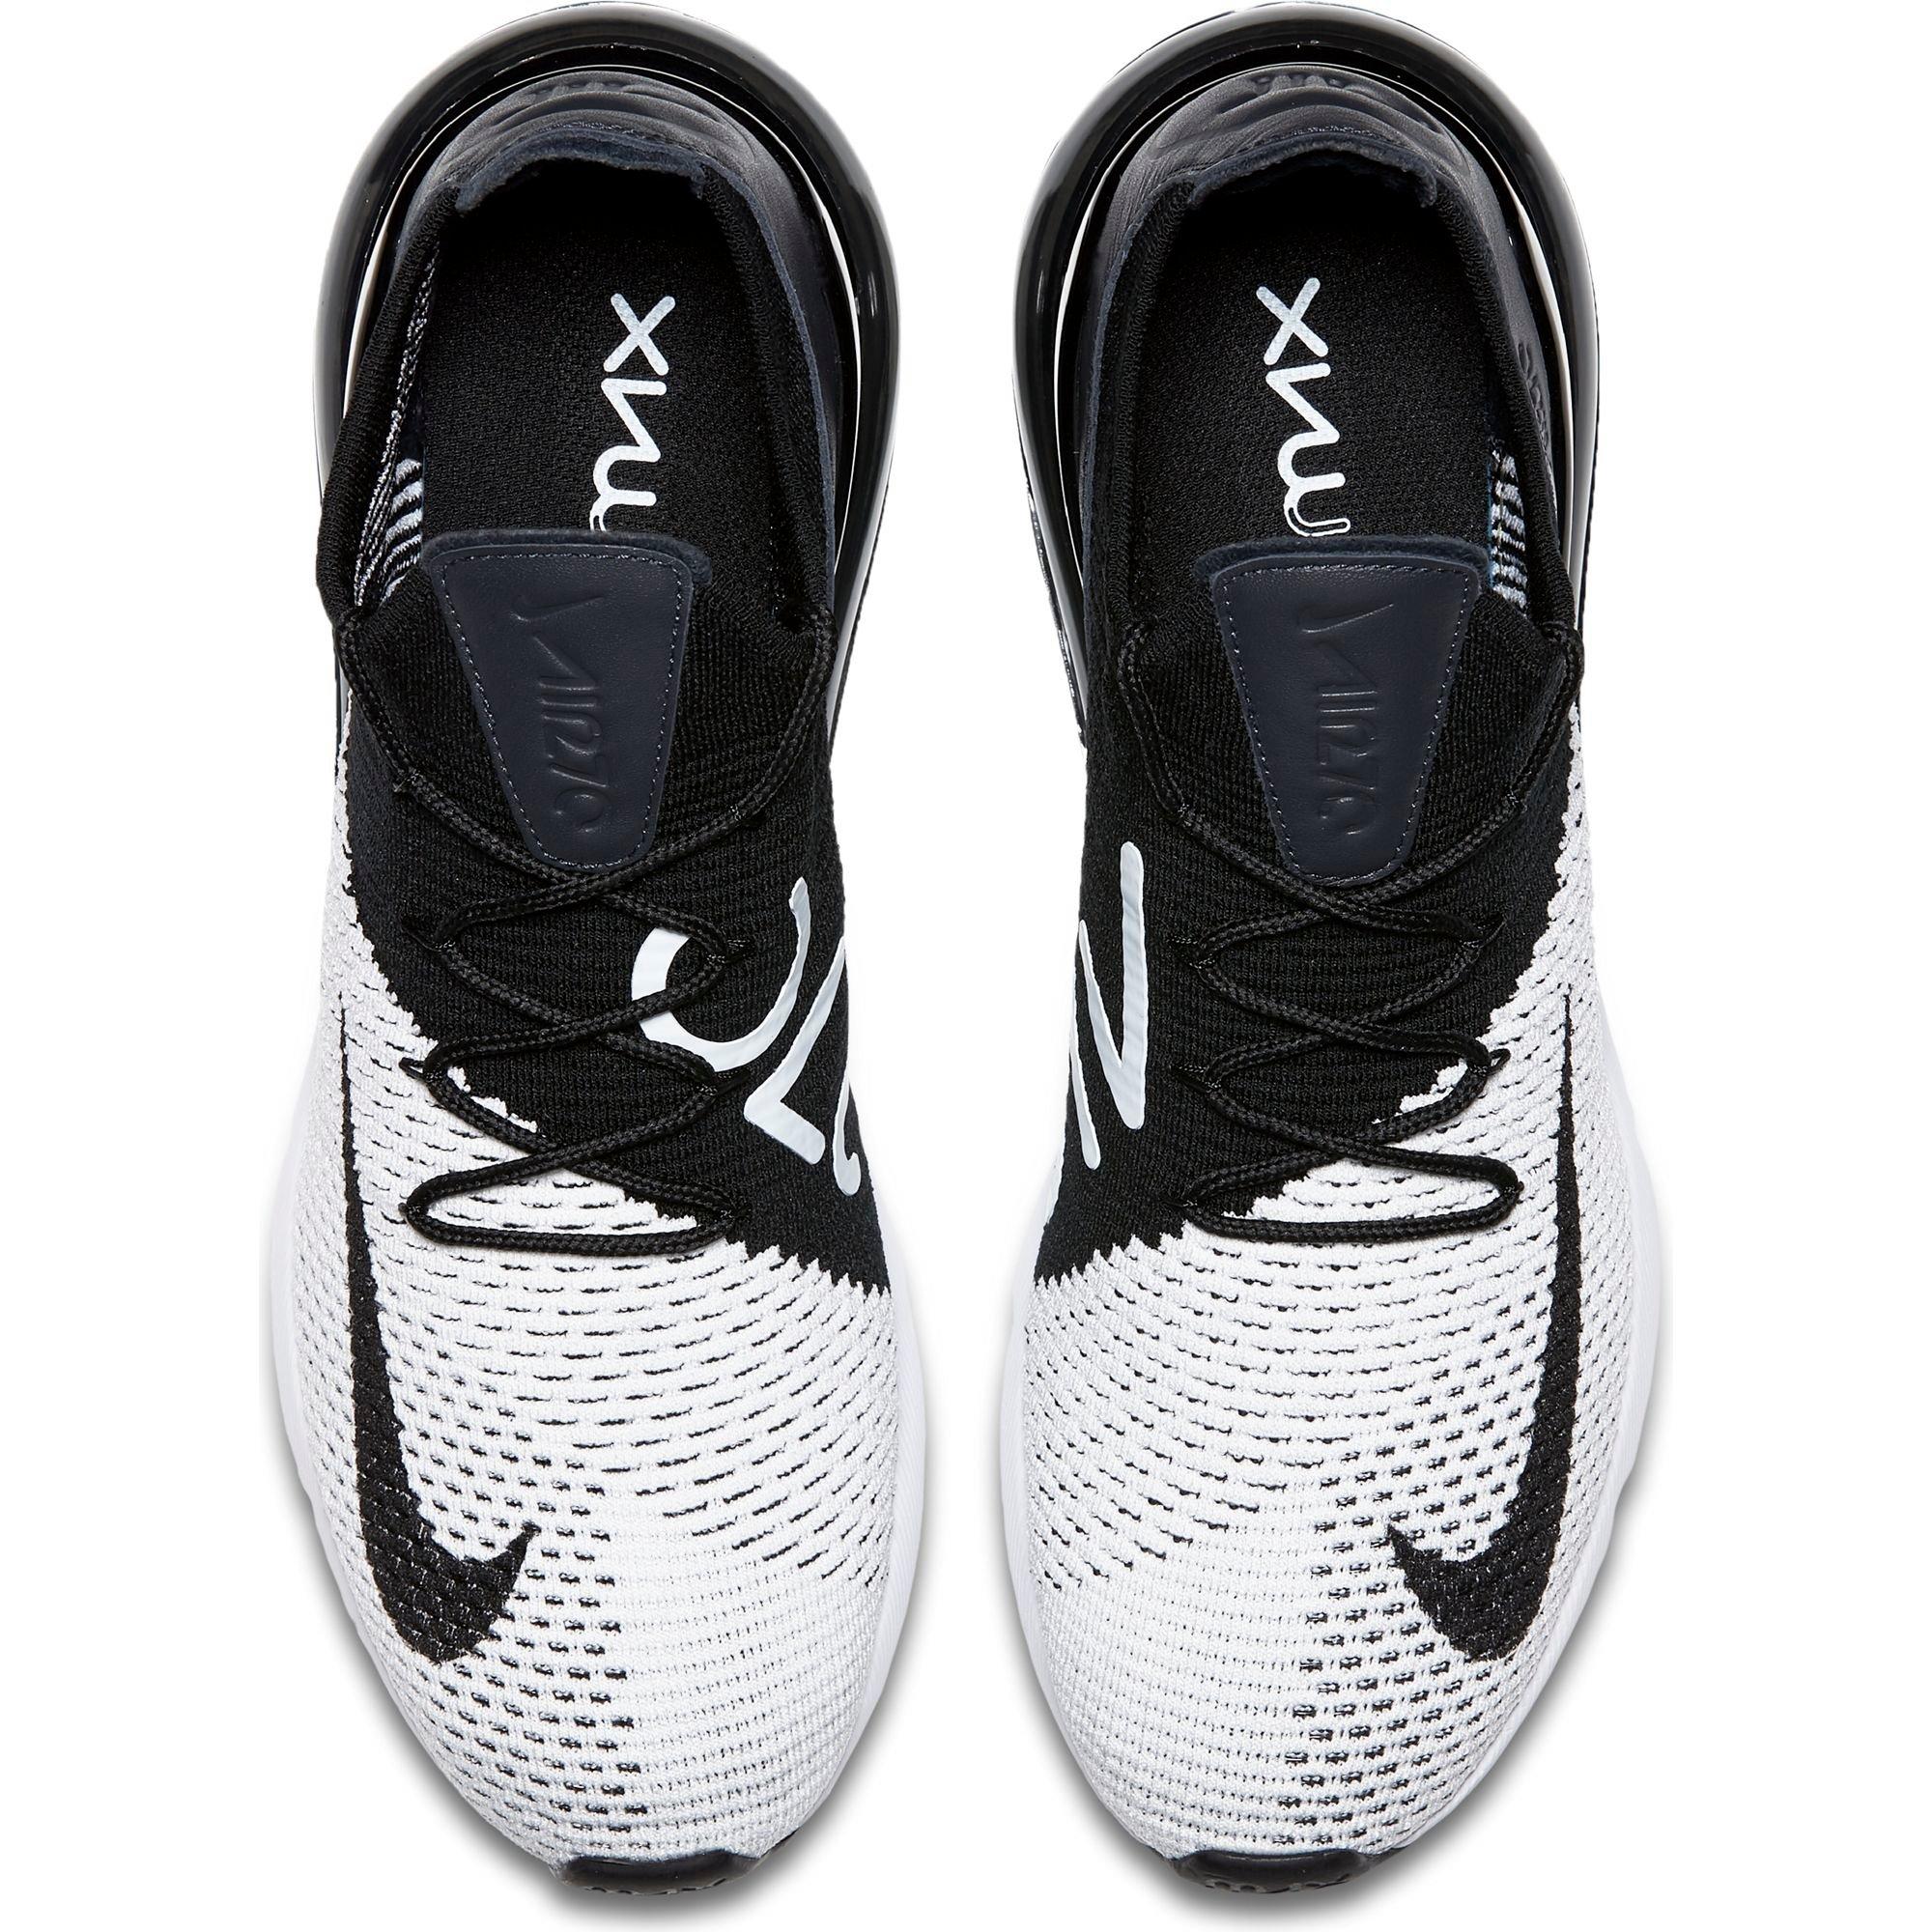 air max 270 flyknit black and white